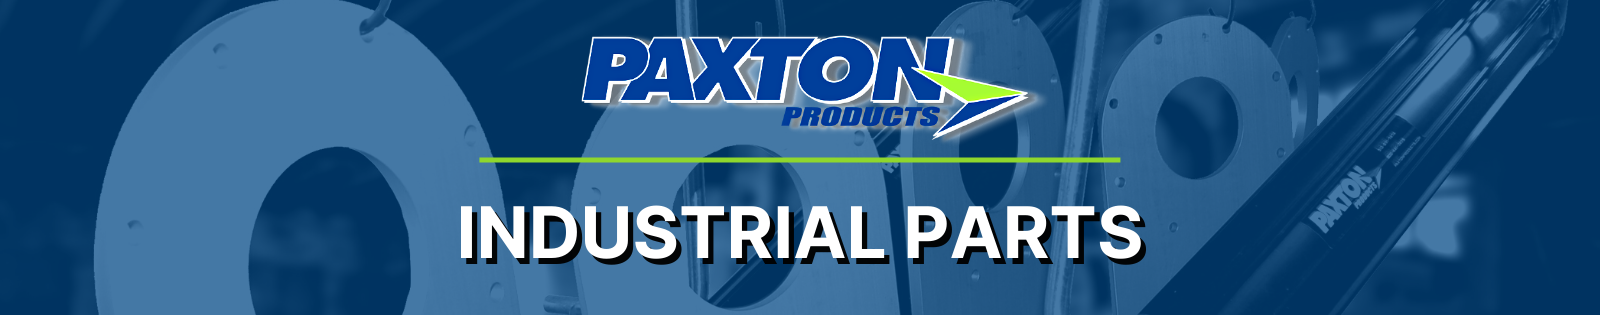 Paxton Products - Industrial Parts - Drying & Blow Off Solutions 